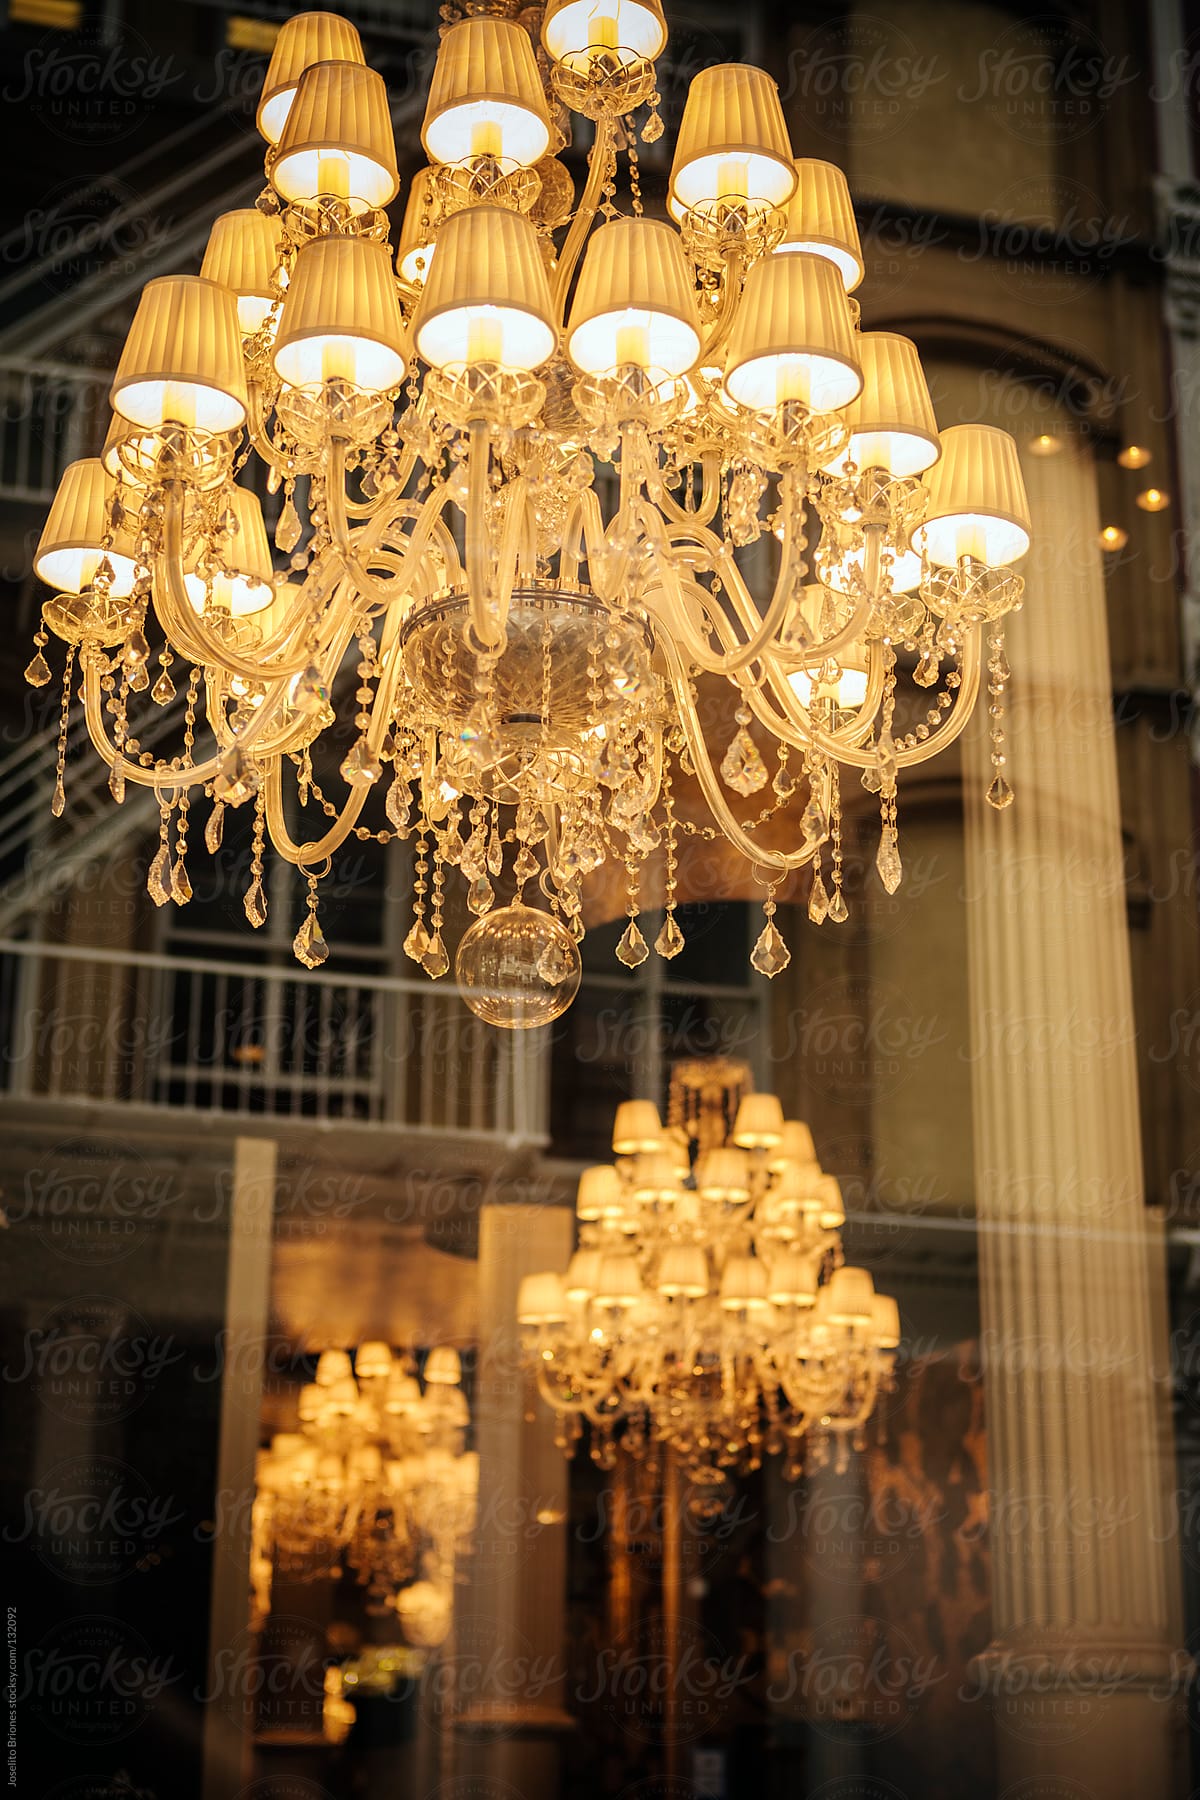 Luxury Chandelier Lighting with Reflections of Buildings